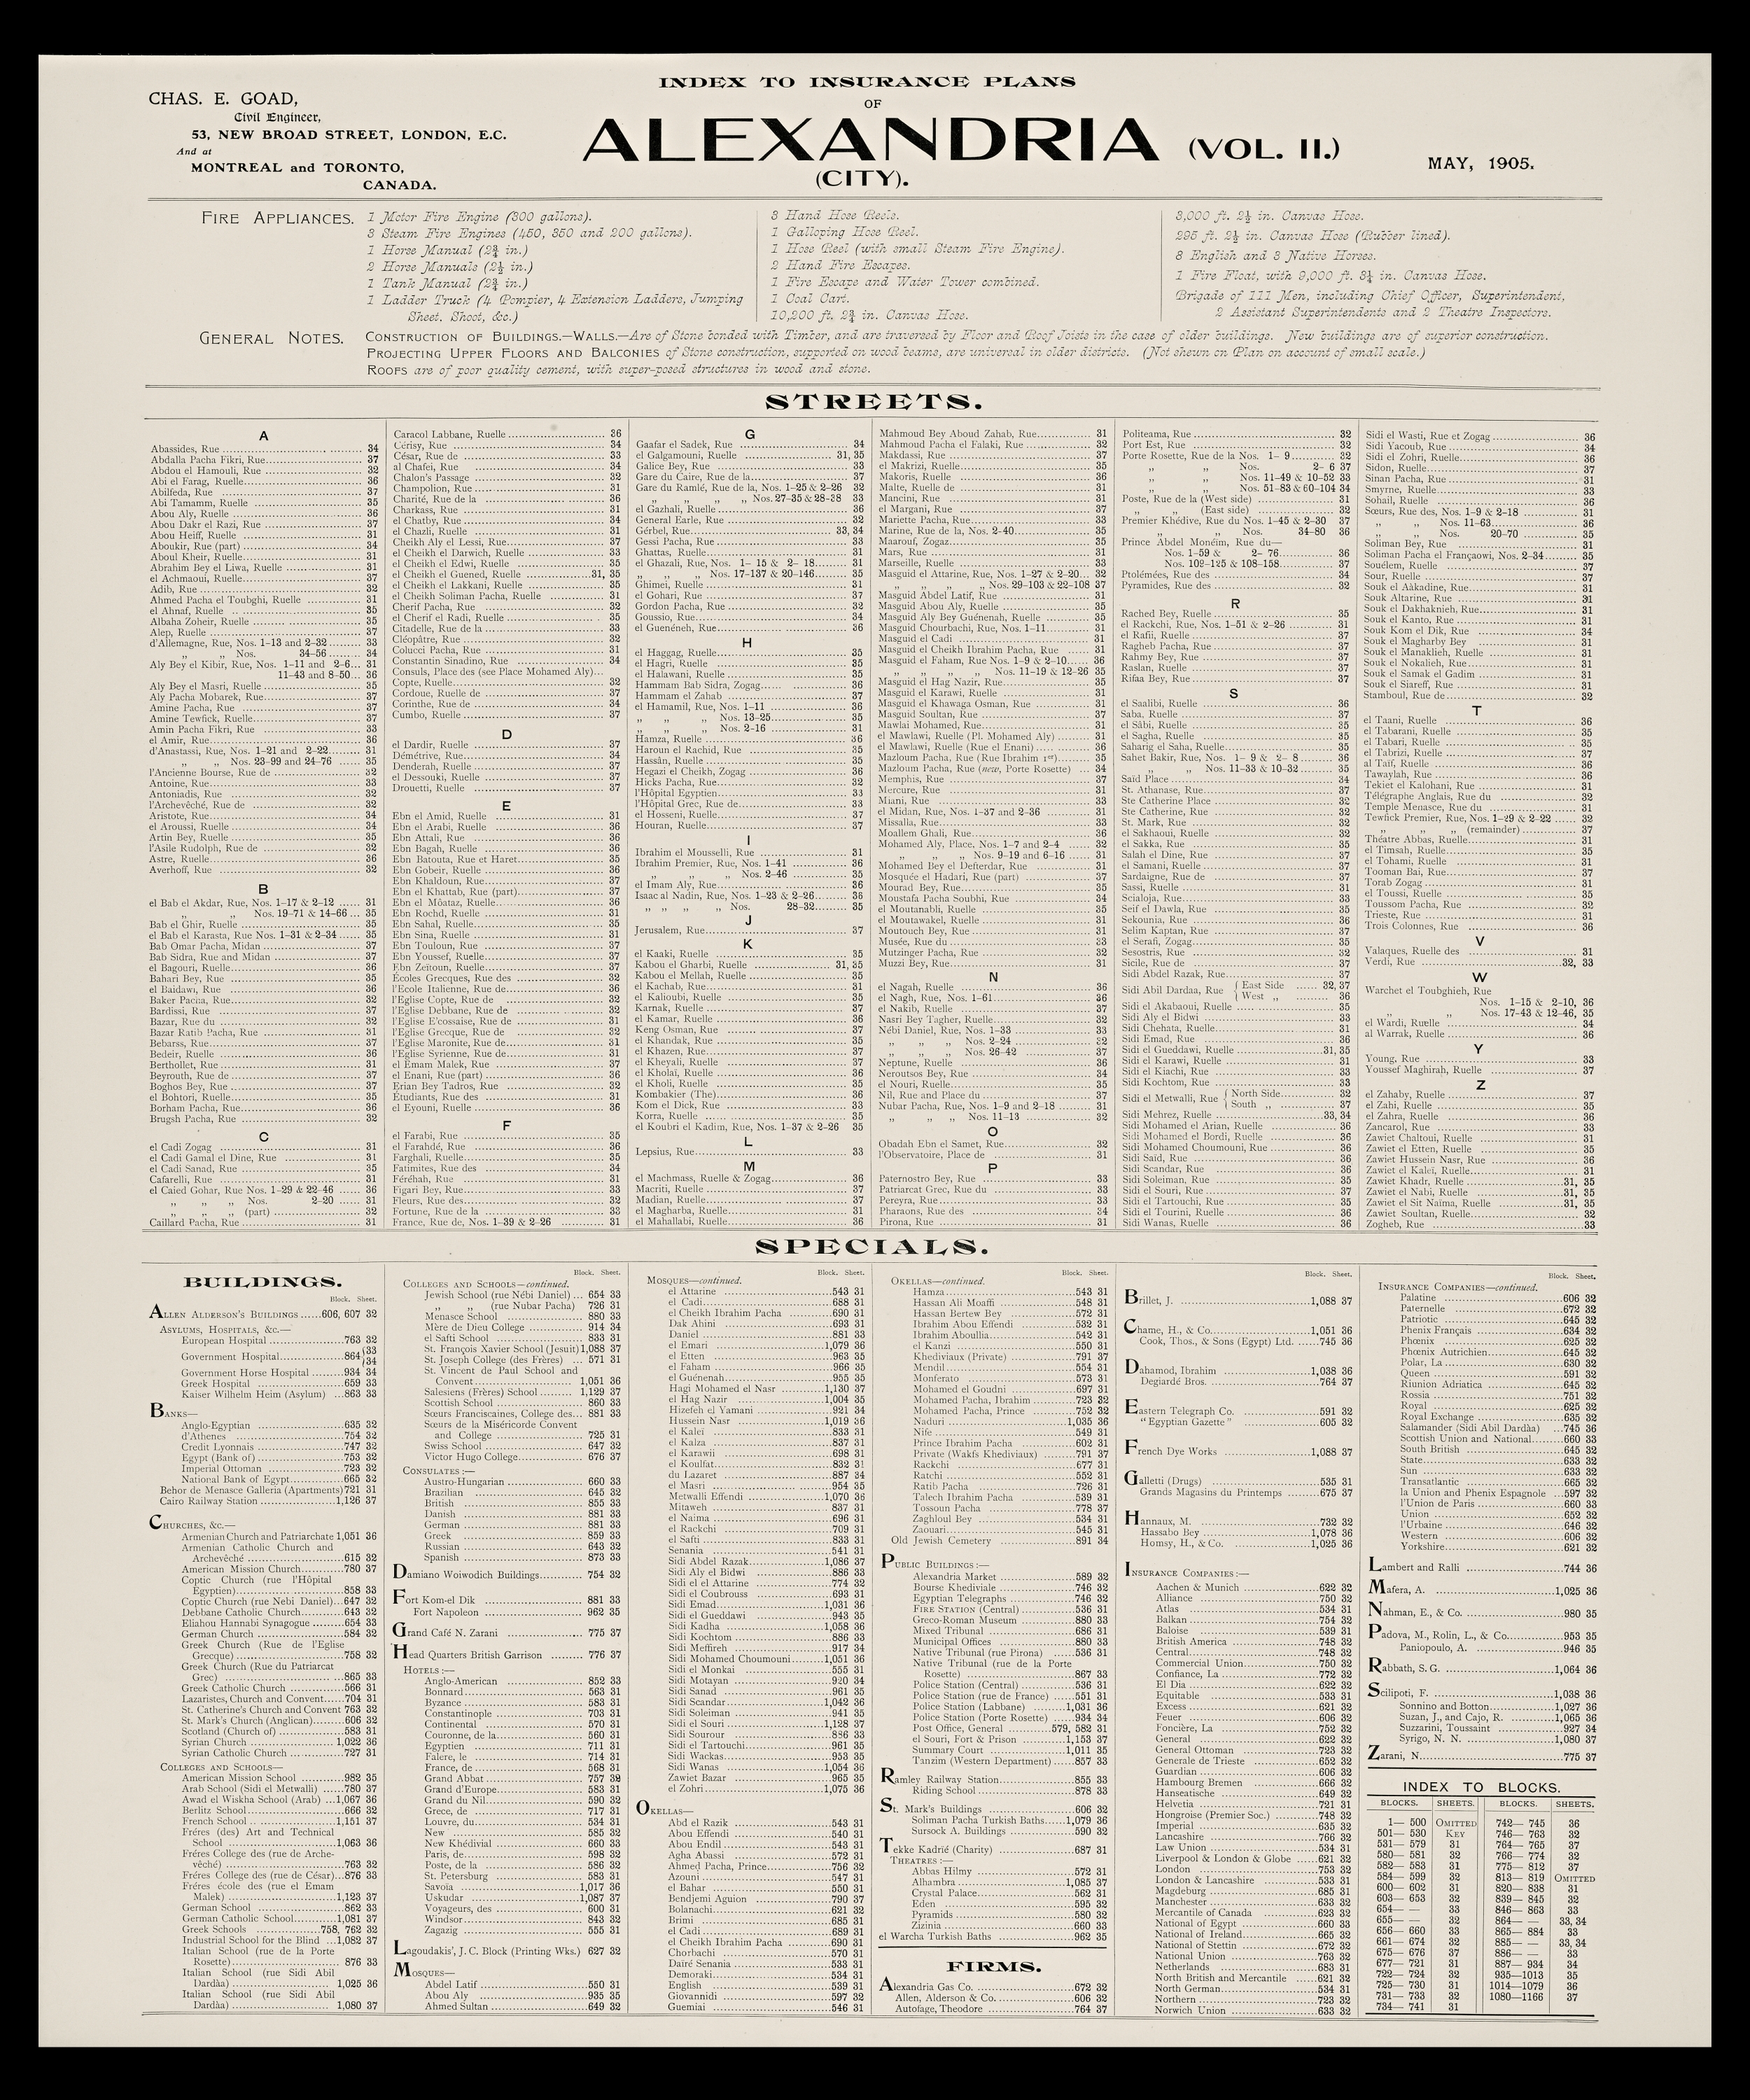 Index to the Insurance Plans of Alexandria (City). (Vol. II.)